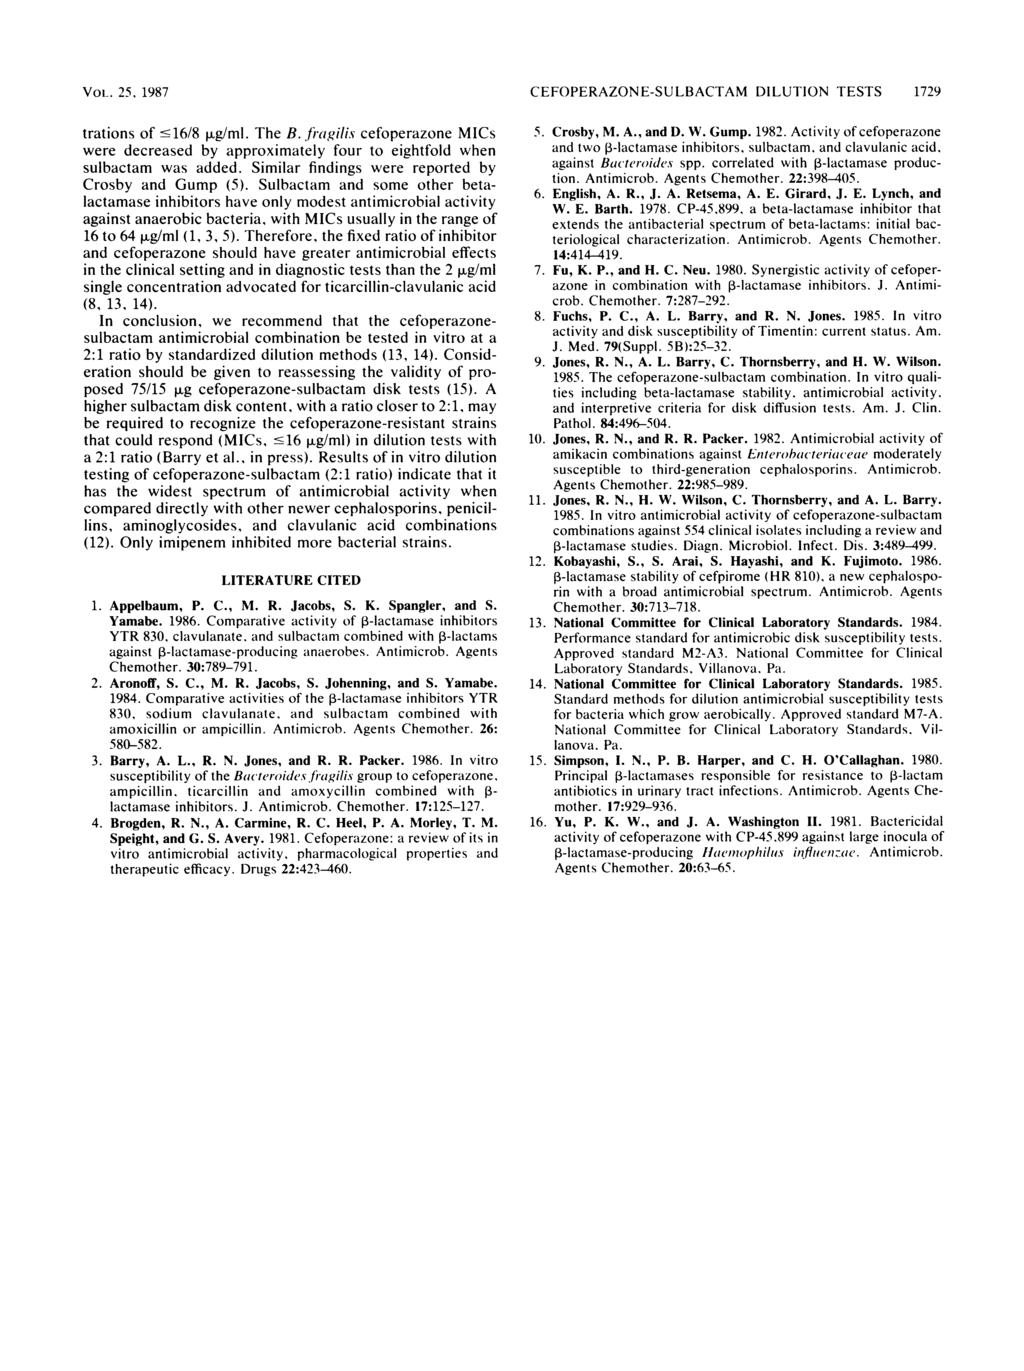 VOL. 25* 1987 trations of <16/8 1tg/ml. The B. firagilis cefoperazone MICs were decreased by approximately four to eightfold when sulbactam was added.